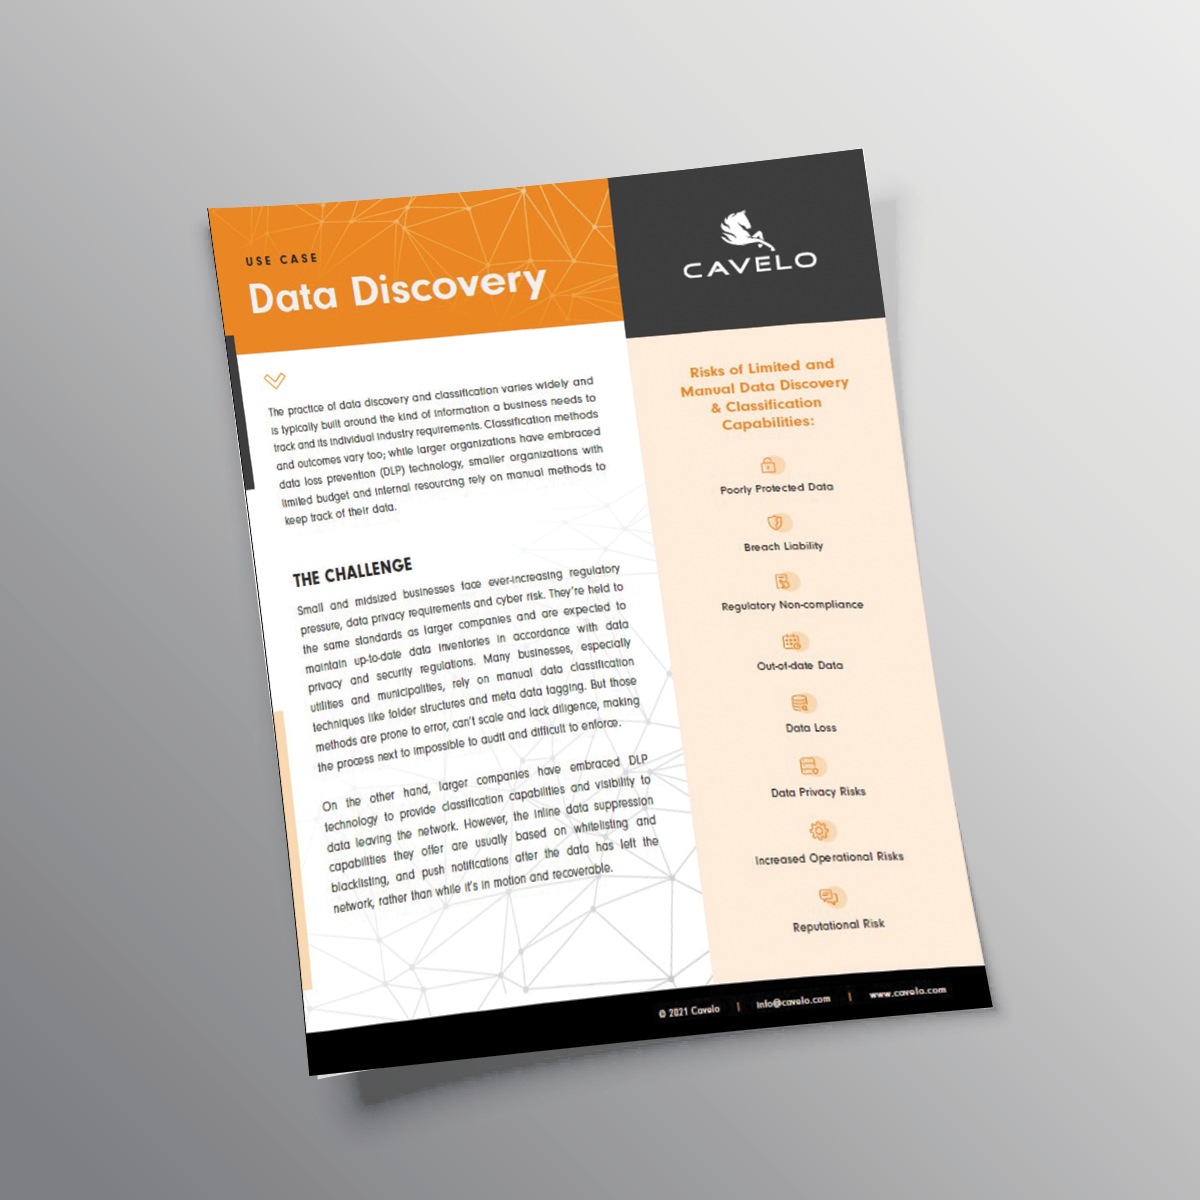 Data Discovery Use Case